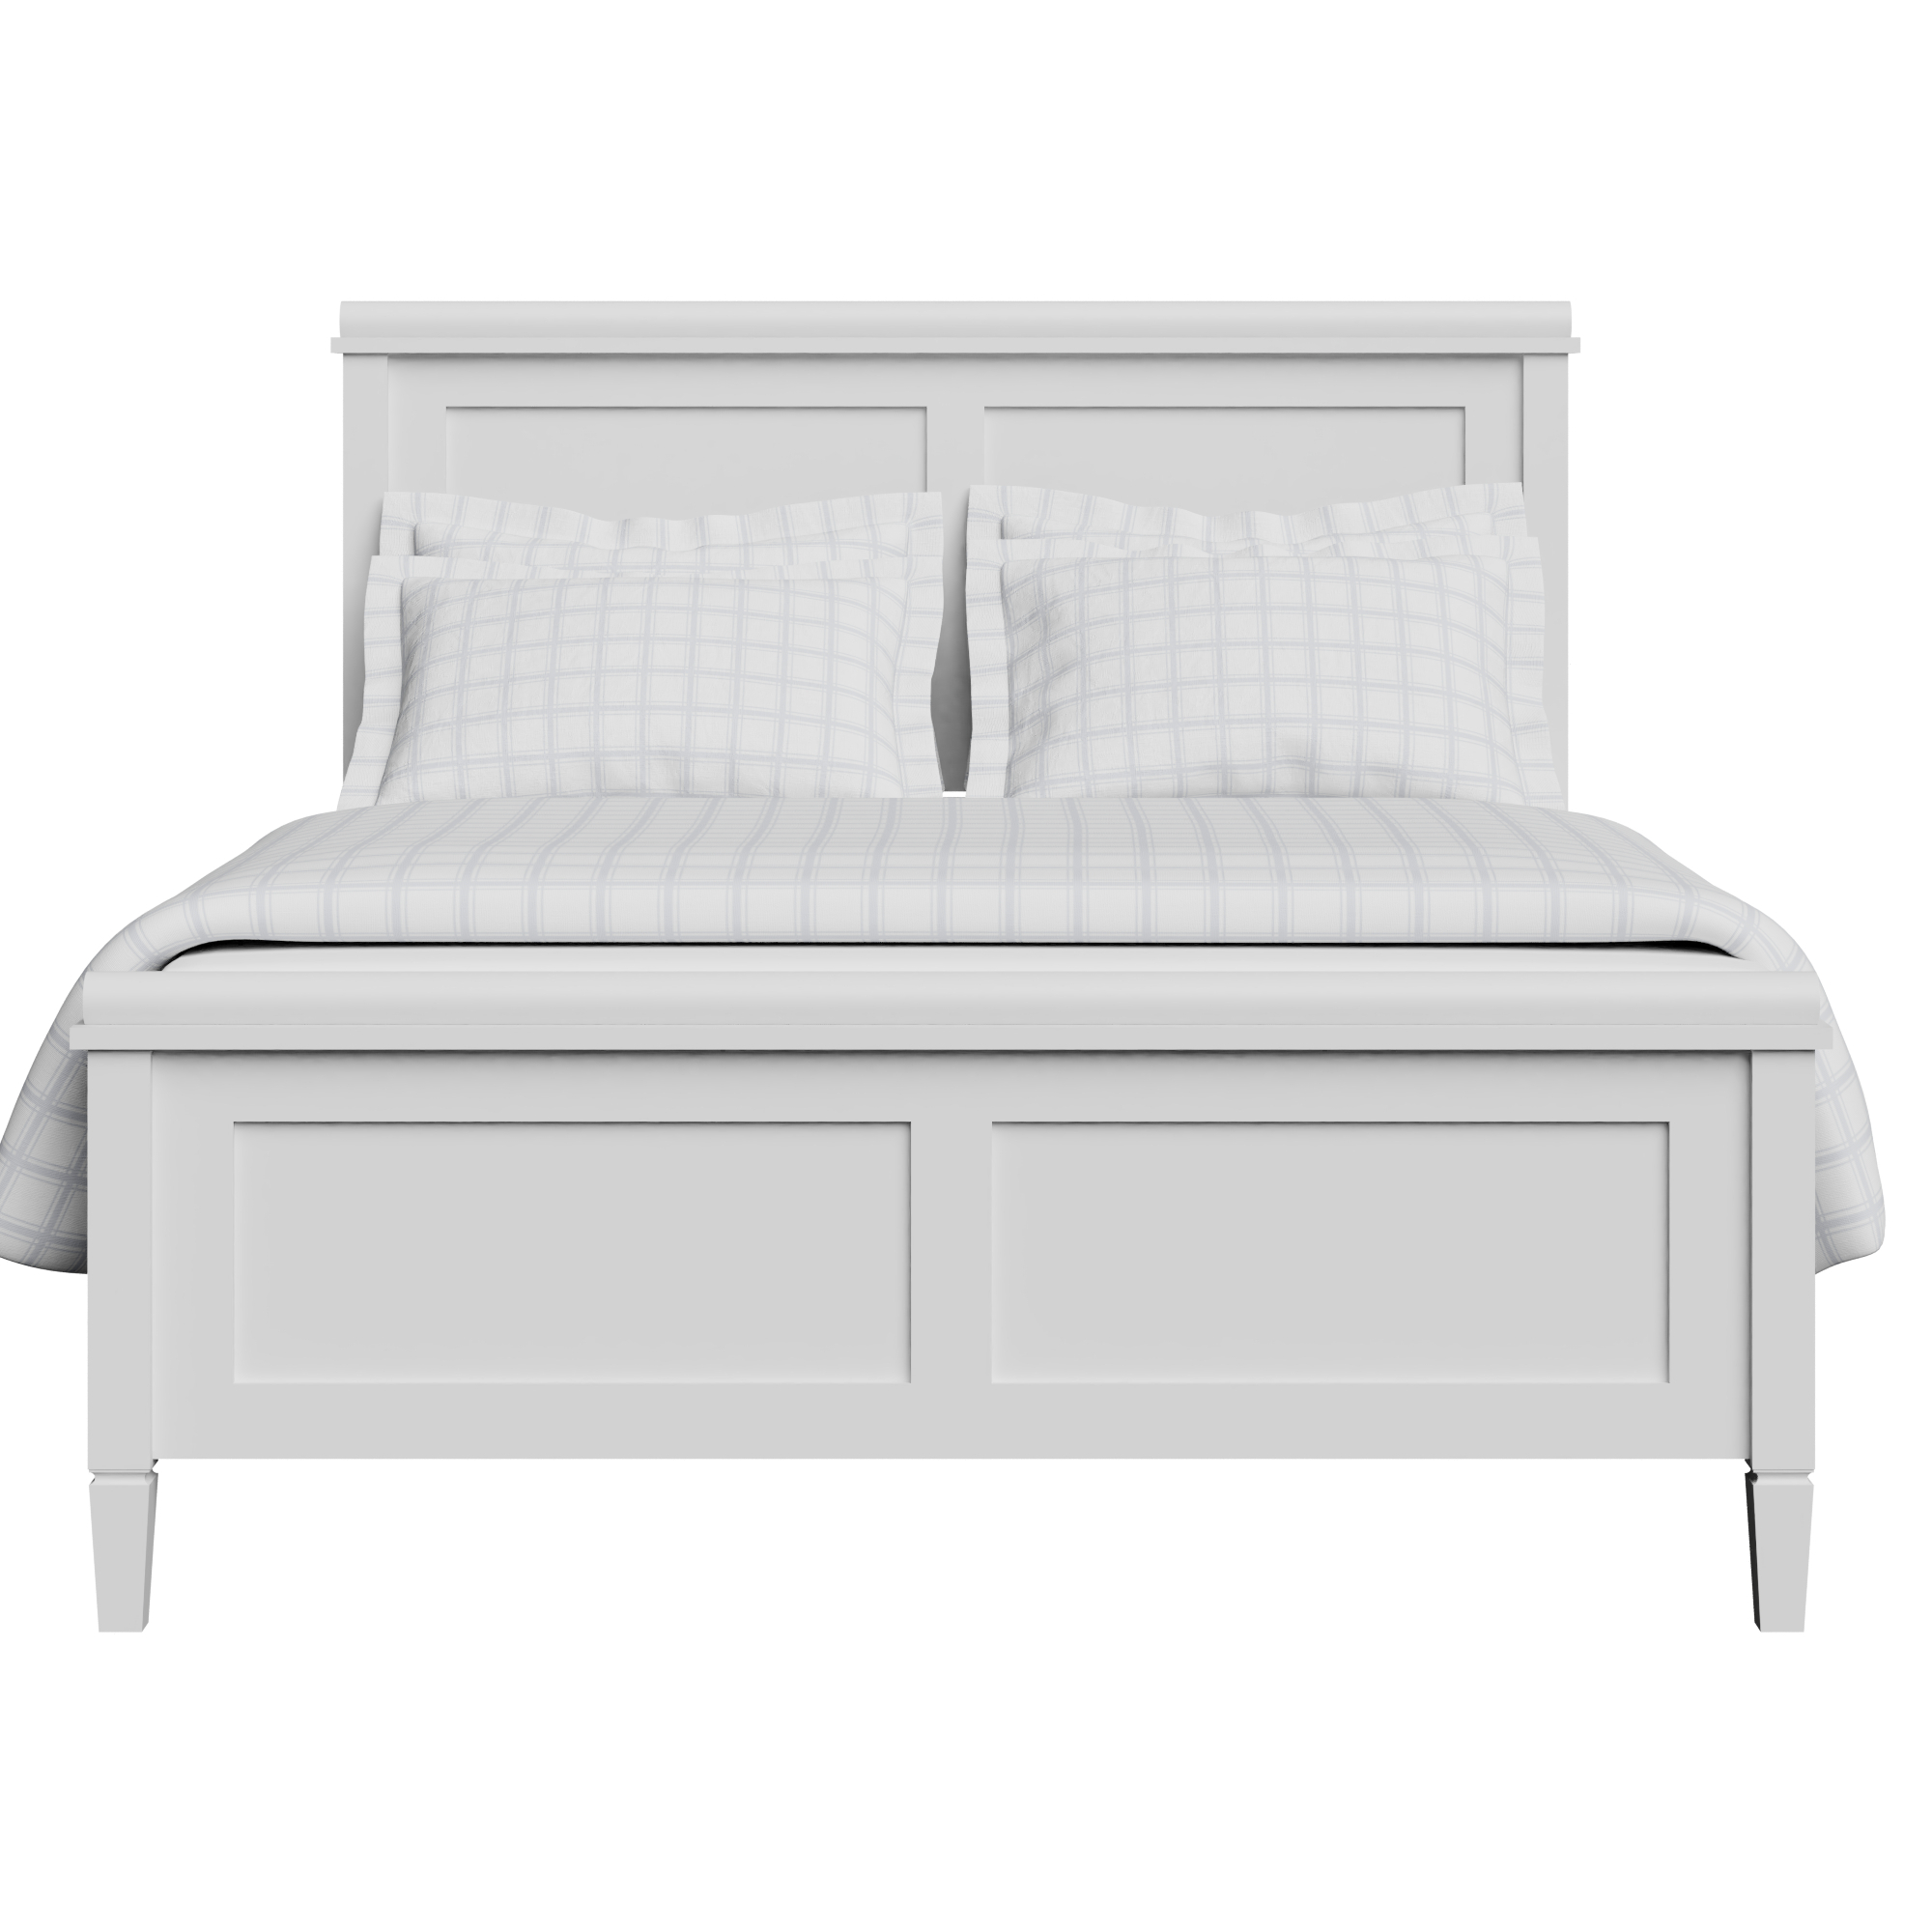 Nocturne Painted Wood Bed Frame The, White Bed Frame Full